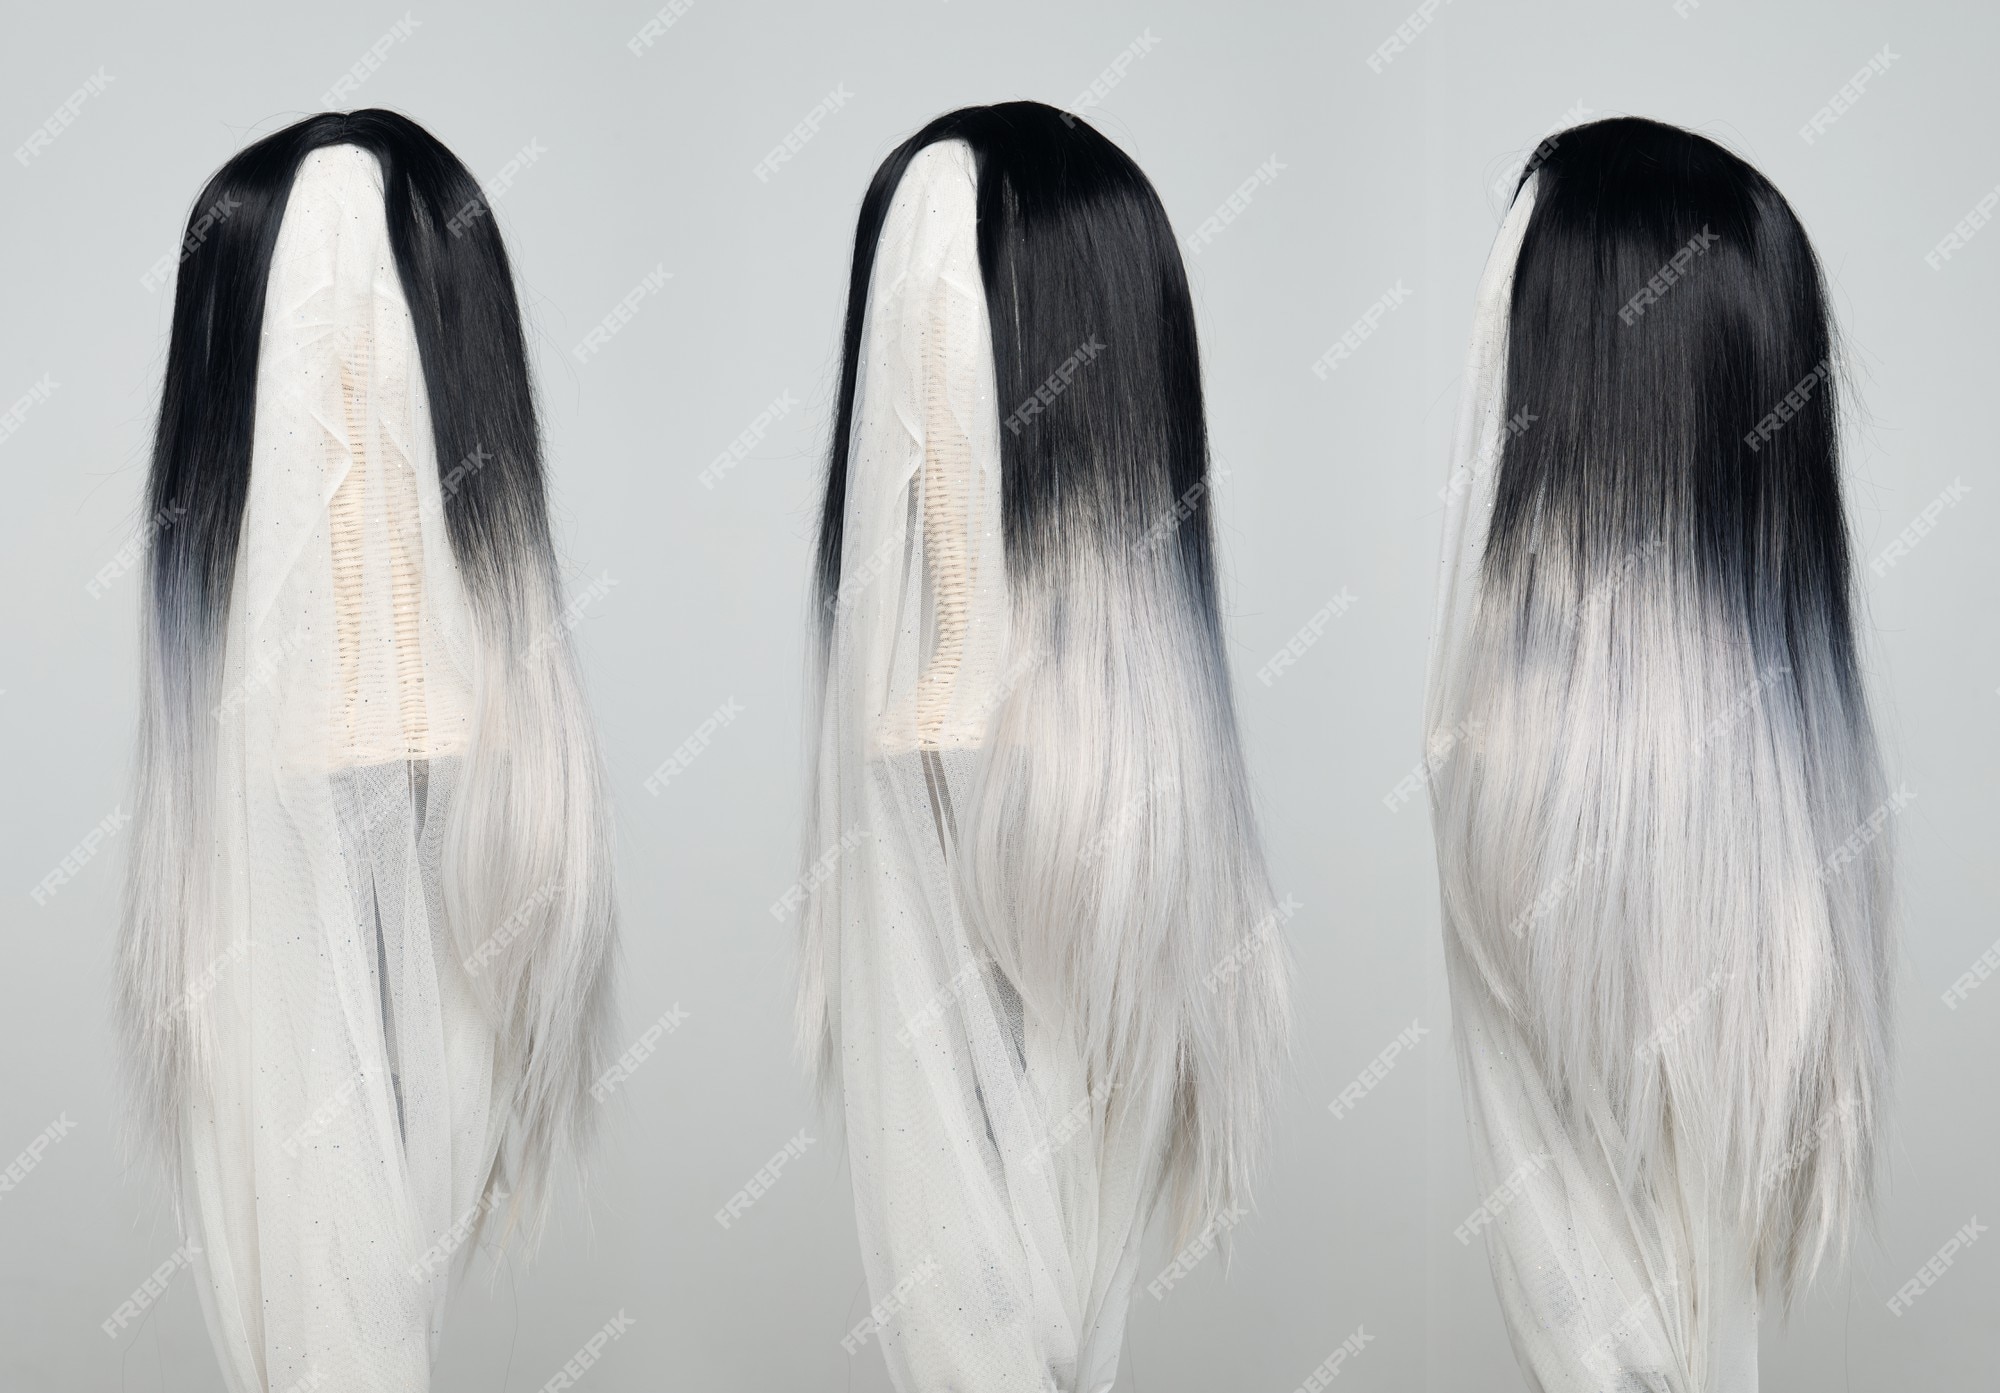 Premium Photo | Black top straight long hair white bottom part wig on  mannequin head over gray background isolated, set of three to show many  angle of hair style wave and light